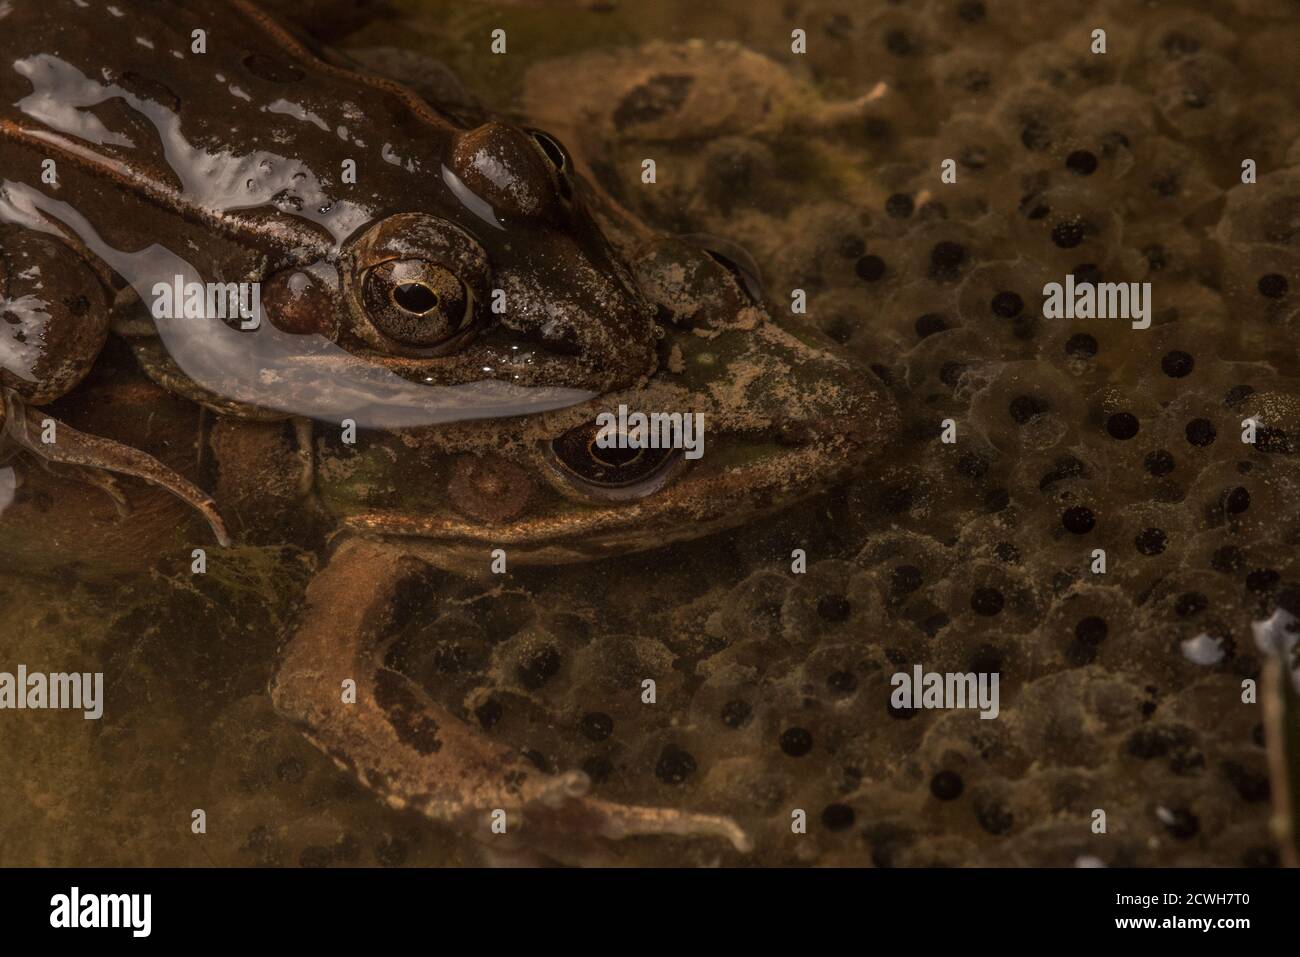 Southern Leopard frogs (Lithobates sphenocephalus) in the water with their eggs in a wetland in North Carolina. Stock Photo